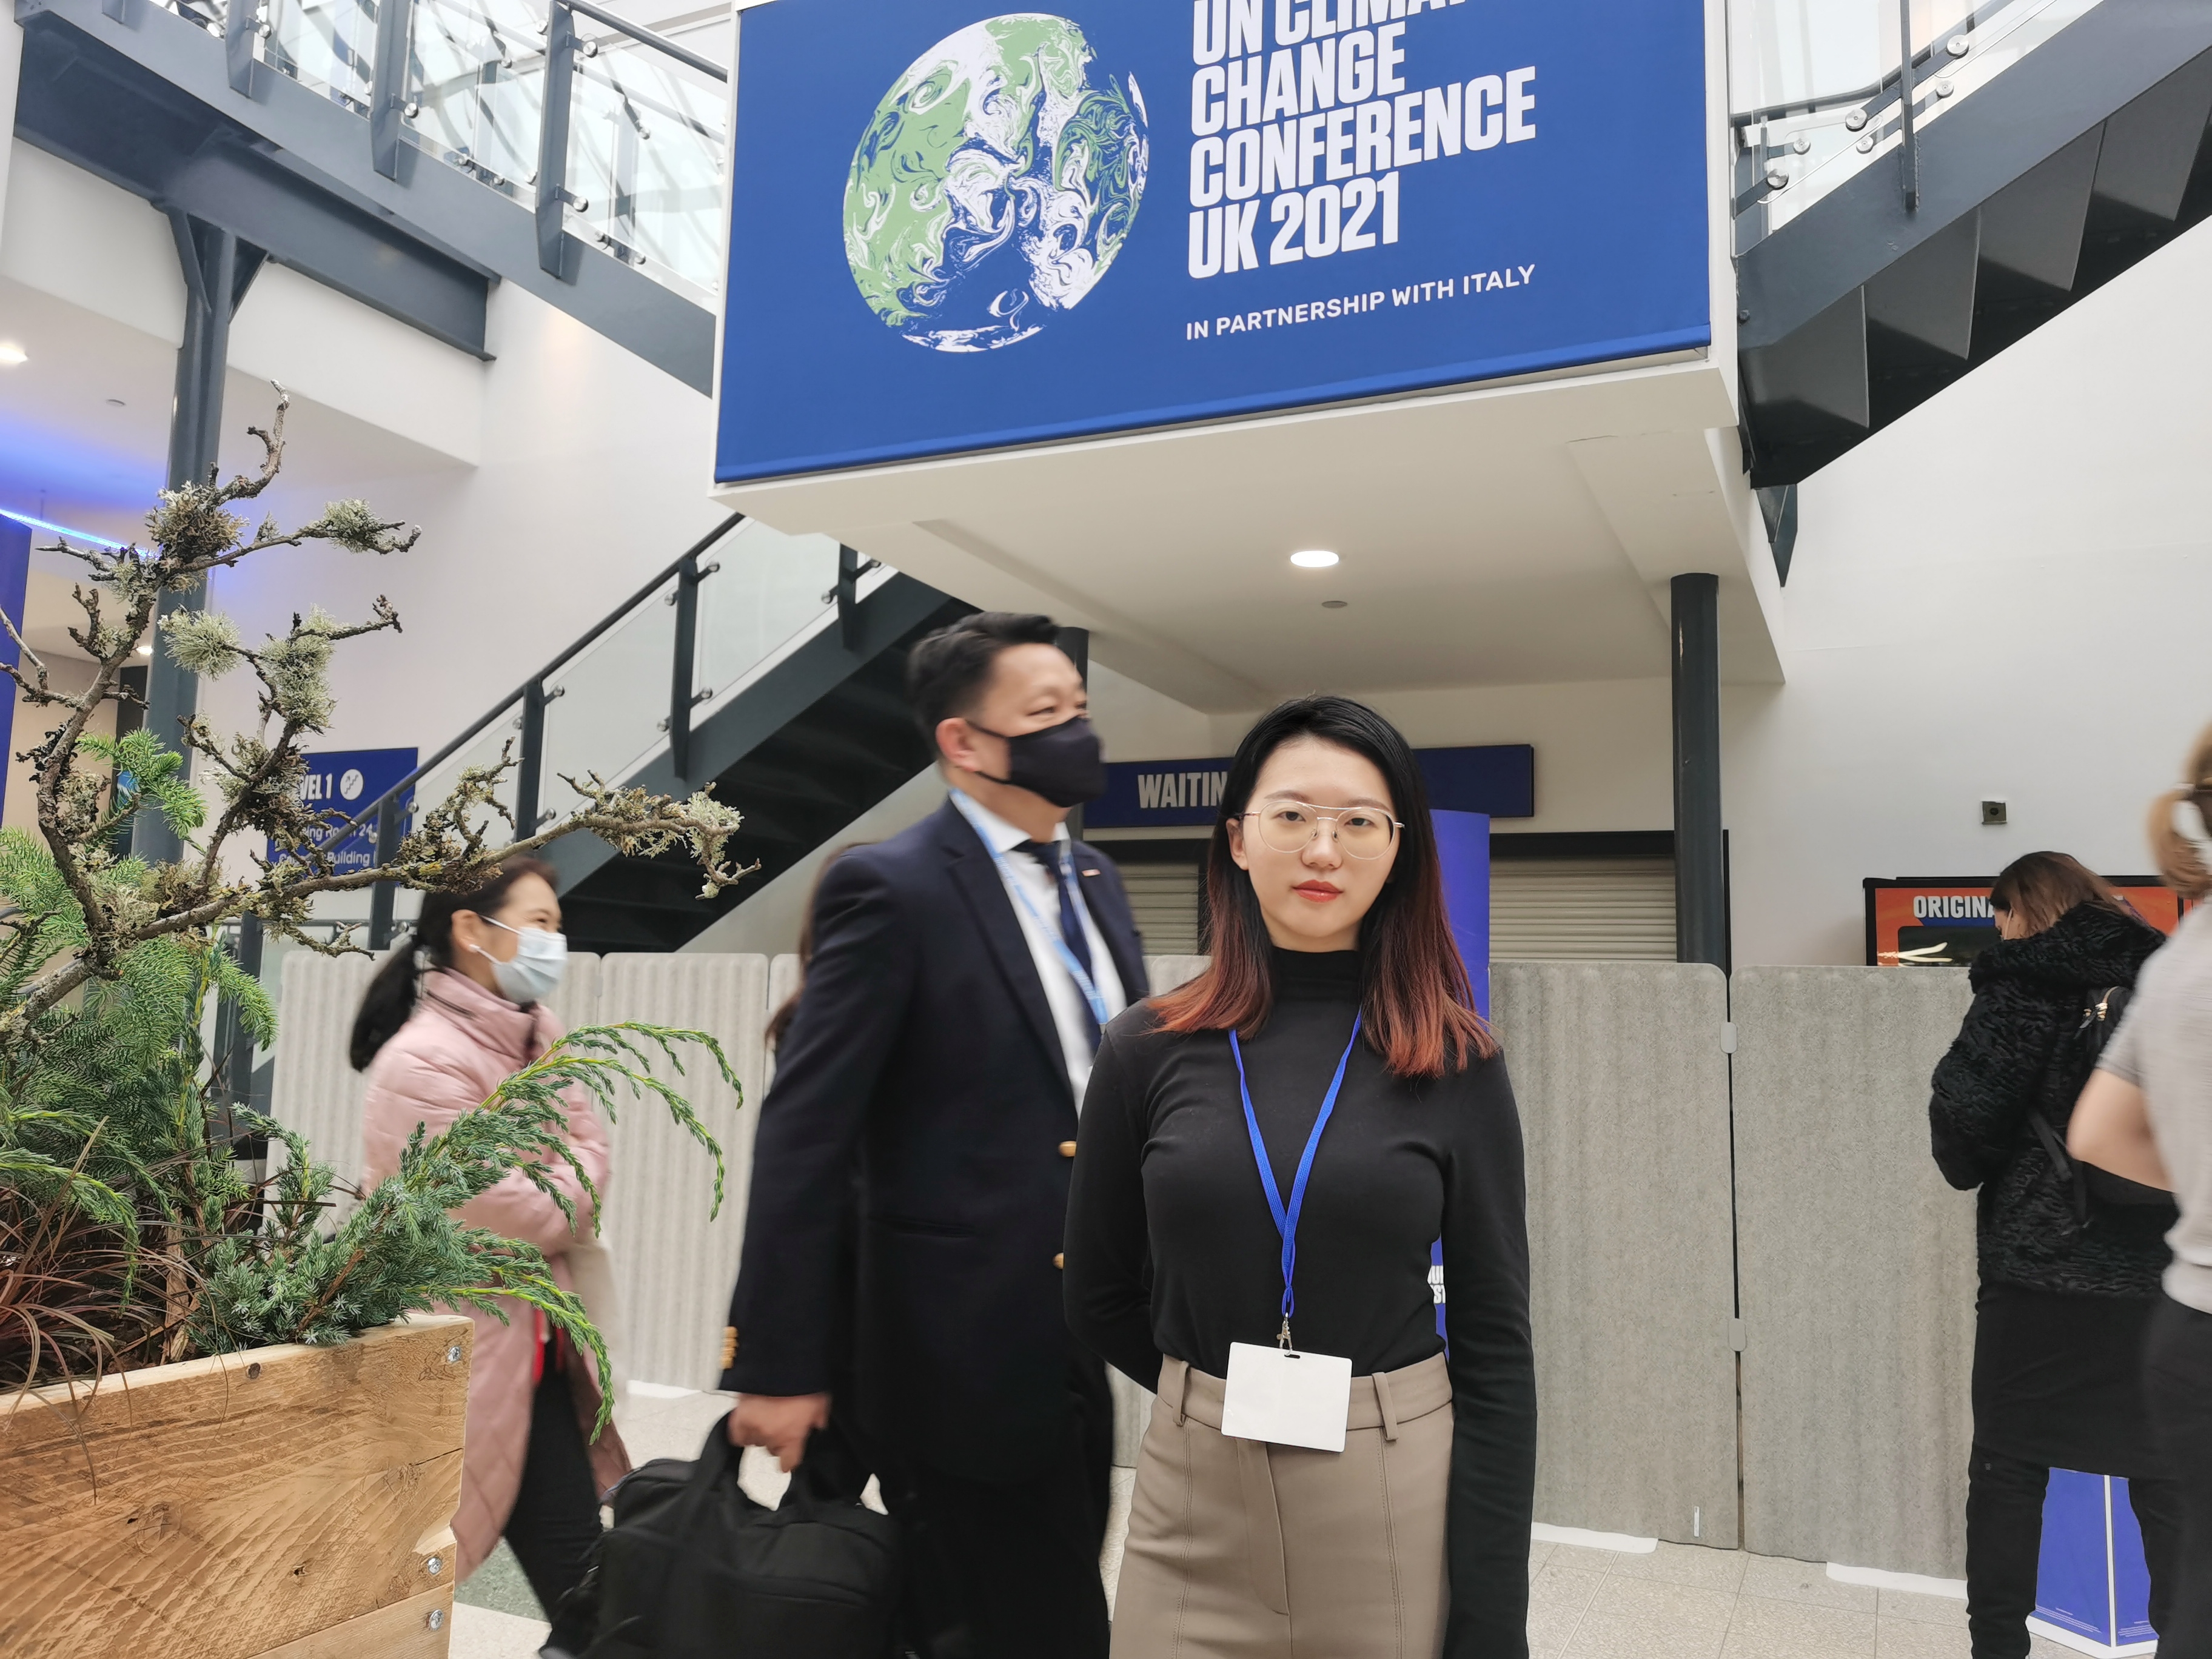 XJTLU student participates in the COP26 Climate Change Conference in Glasgow